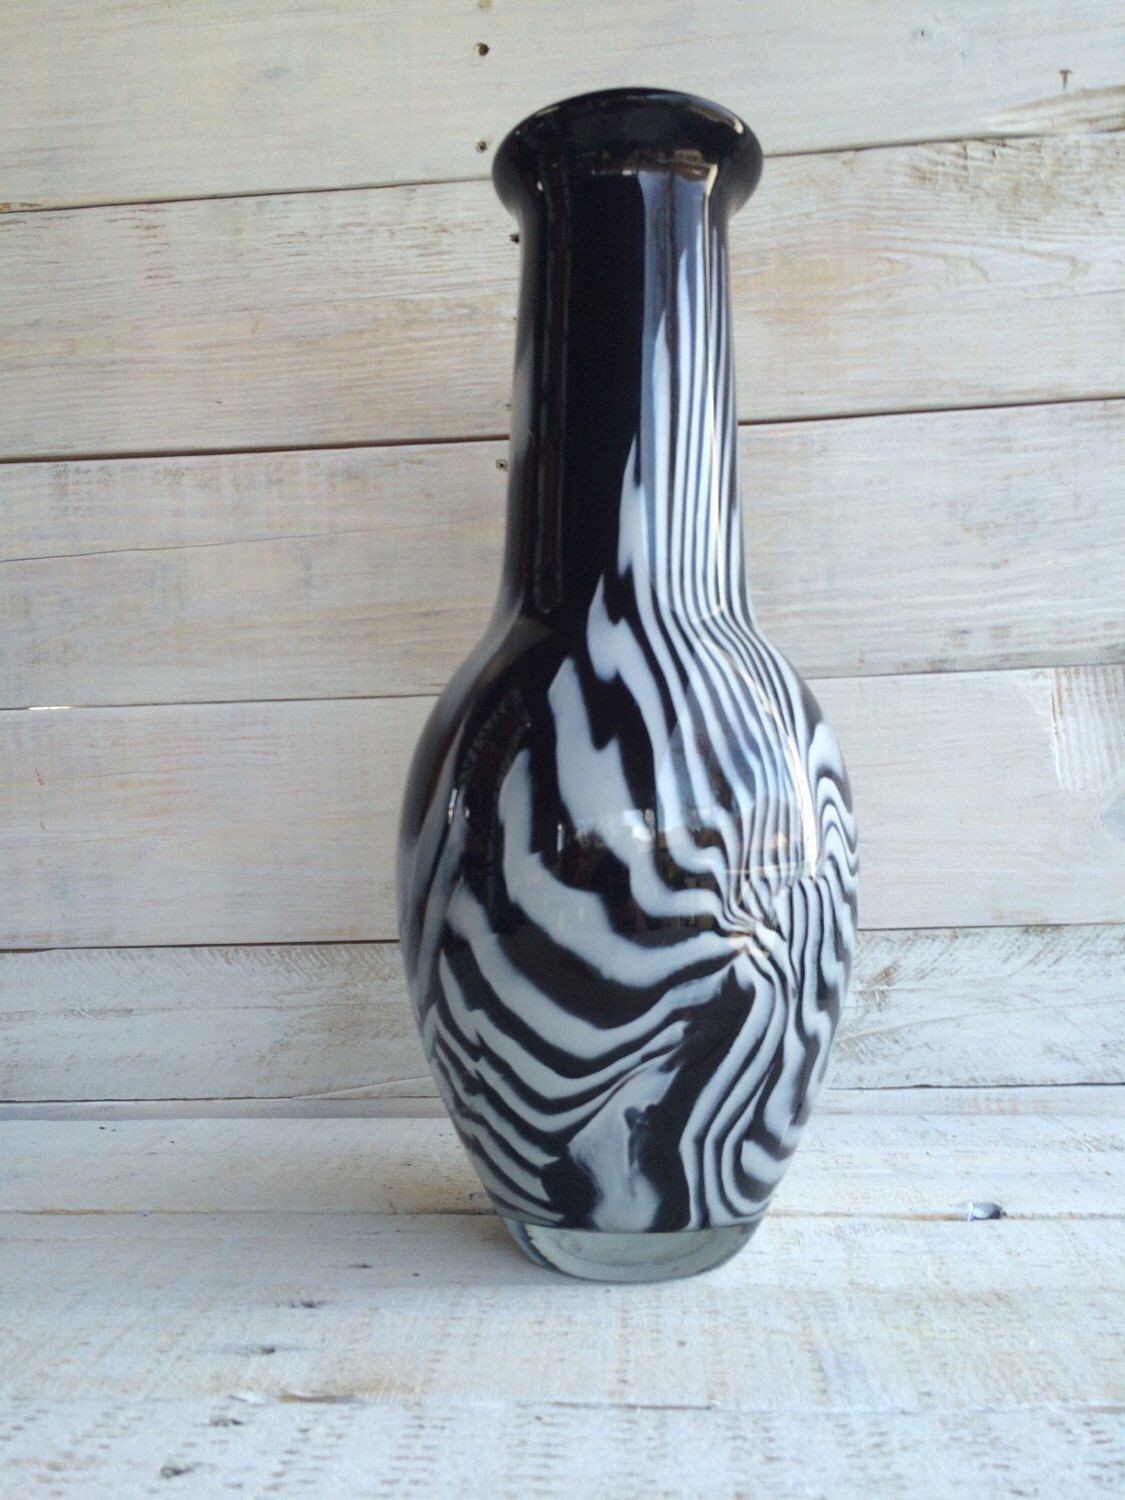 3d printed vase of mihai topescu 17 inch signed vase art glass vase long neck throughout mihai topescu 17 inch signed vase art glass vase long neck amphora